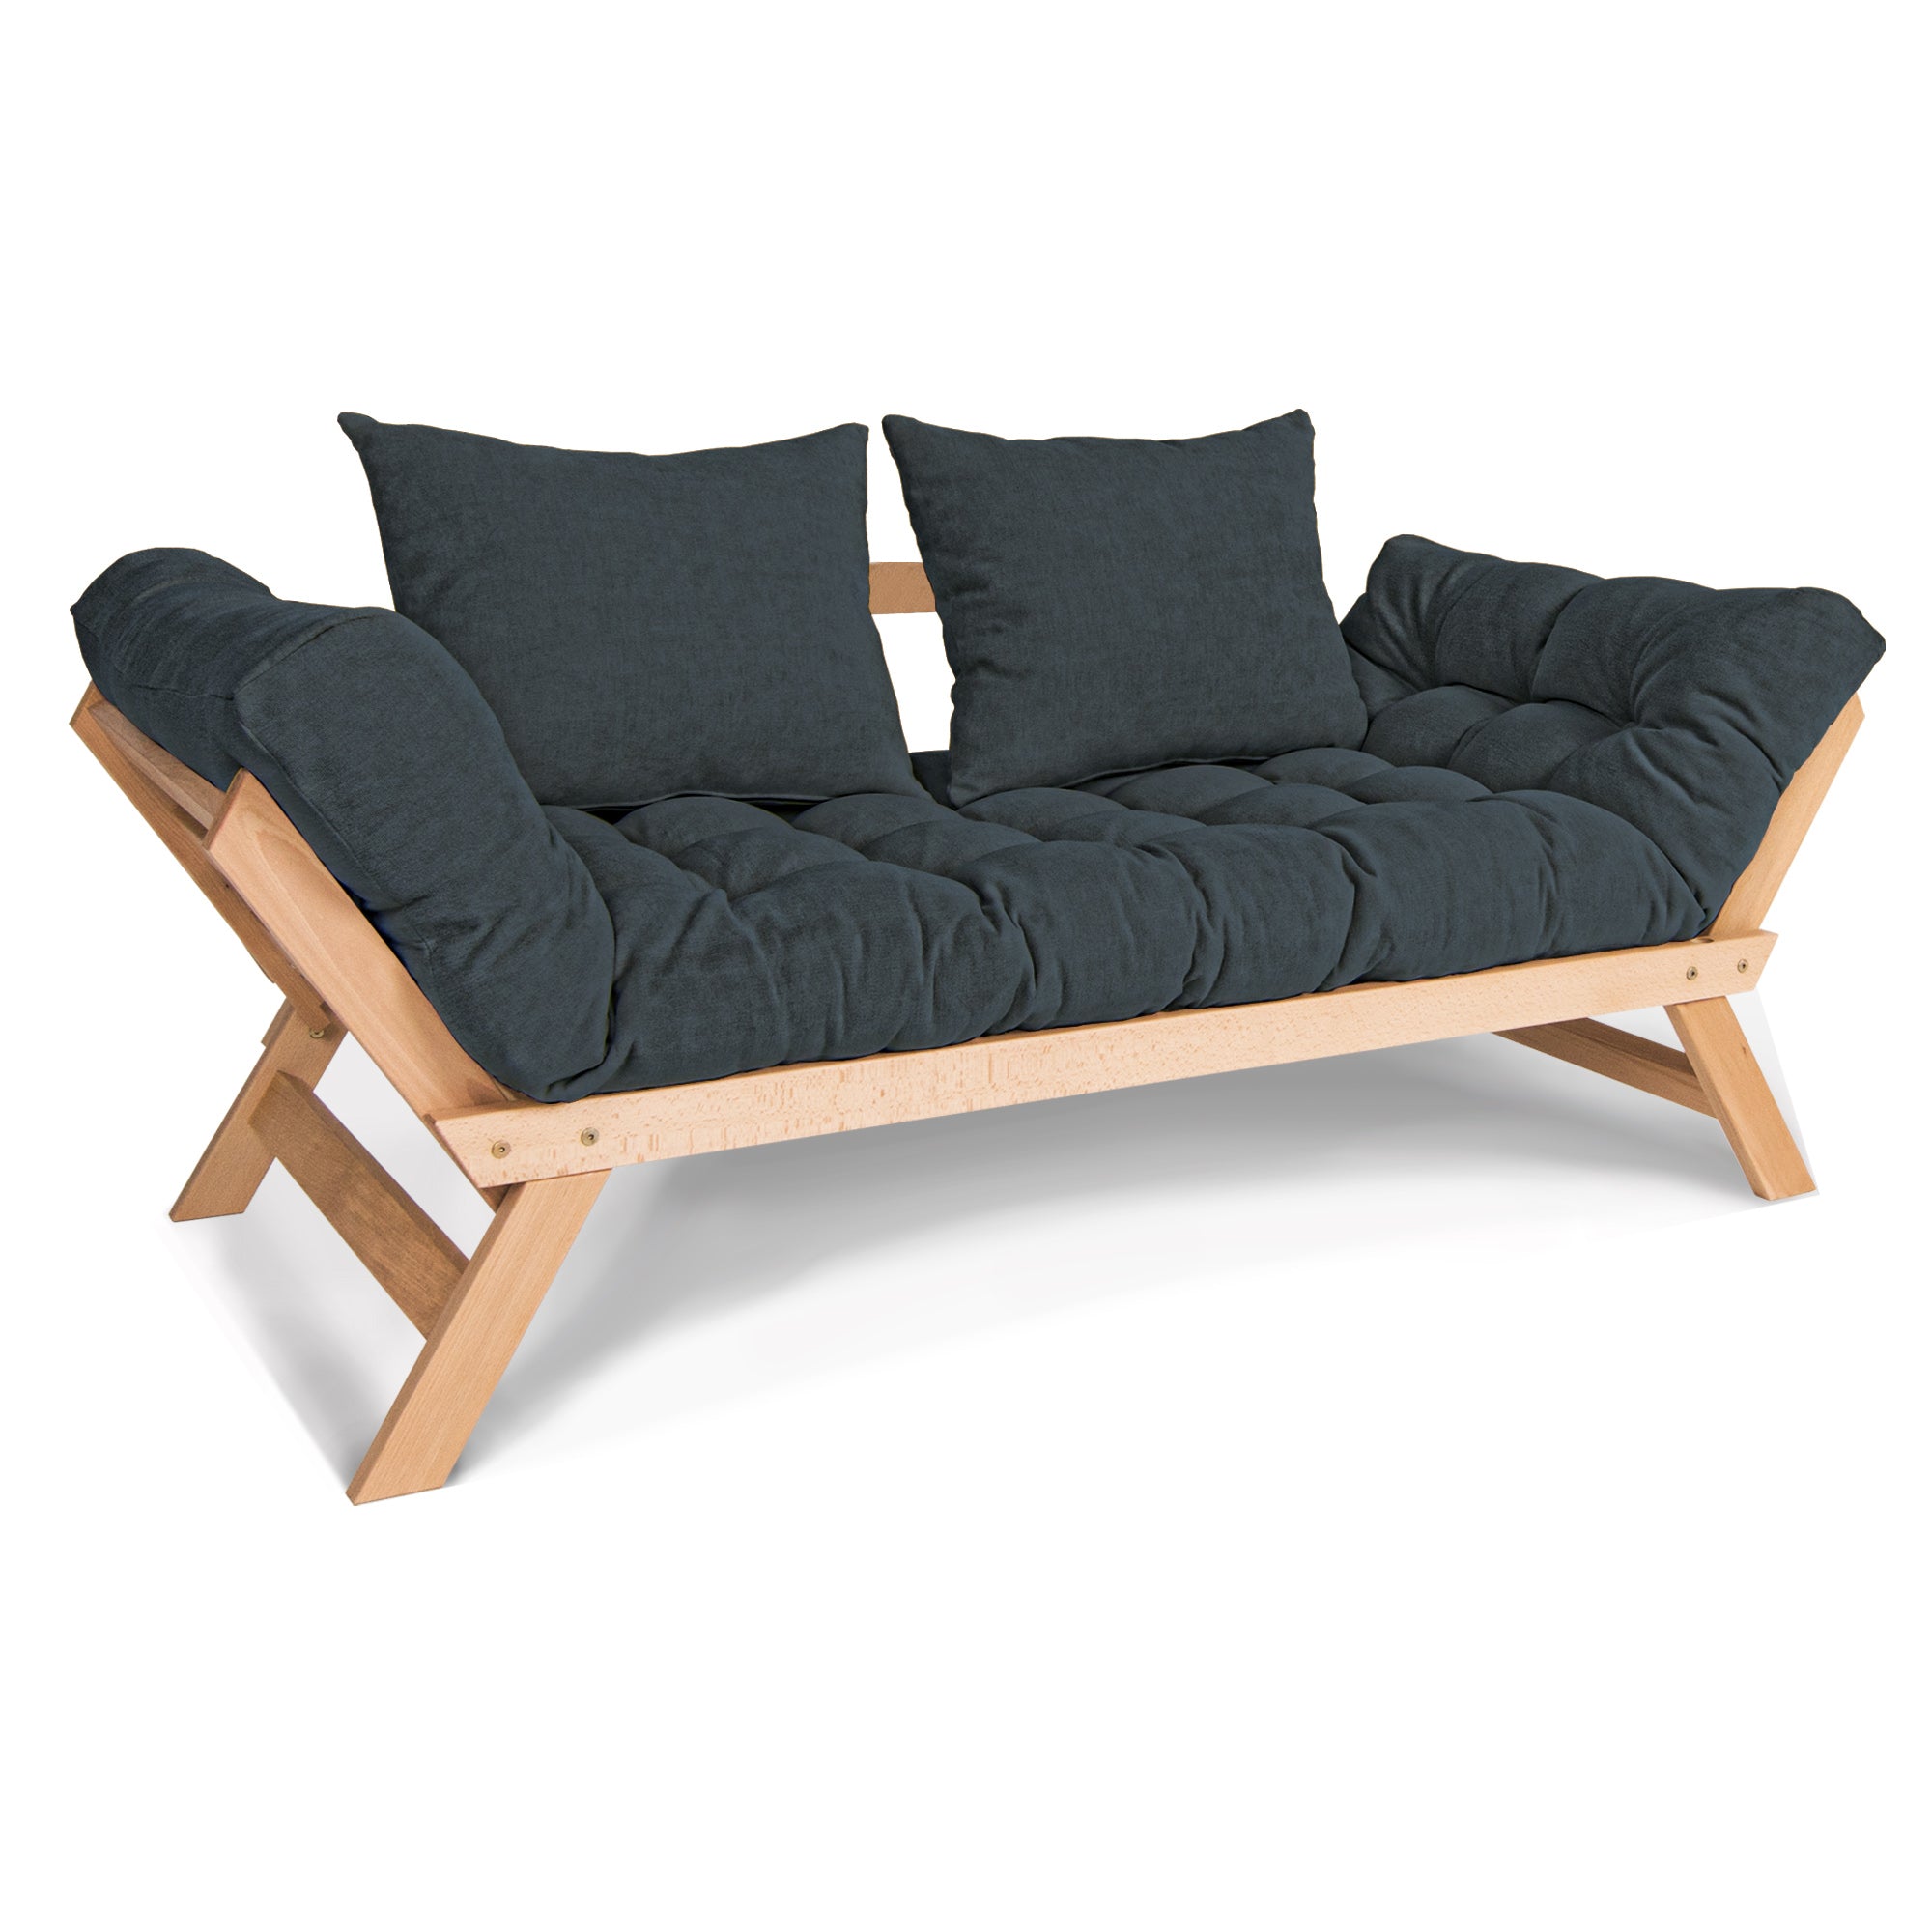 ALLEGRO Folding Sofa Bed, Beech Wood Frame, Natural Colour upholstery colour  graphite